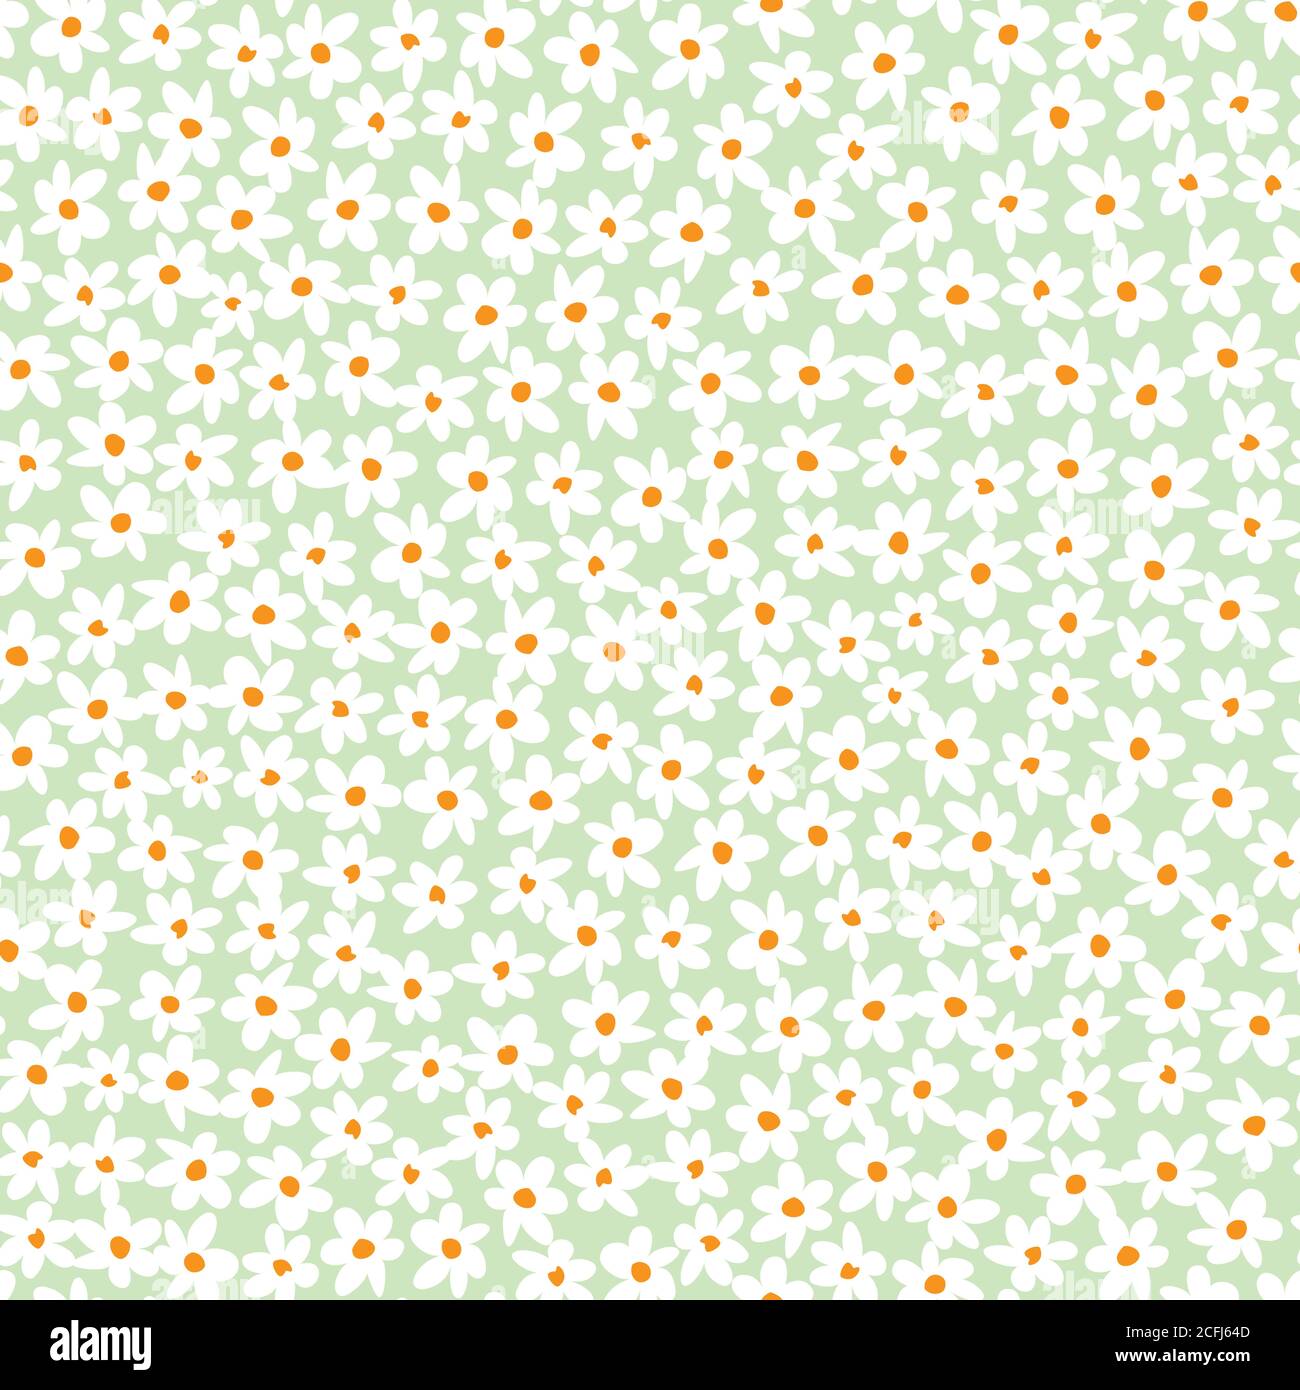 Vector green pastel compact fun daisy flowers repeat pattern with orange center. Suitable for textile, gift wrap and wallpaper. Stock Vector